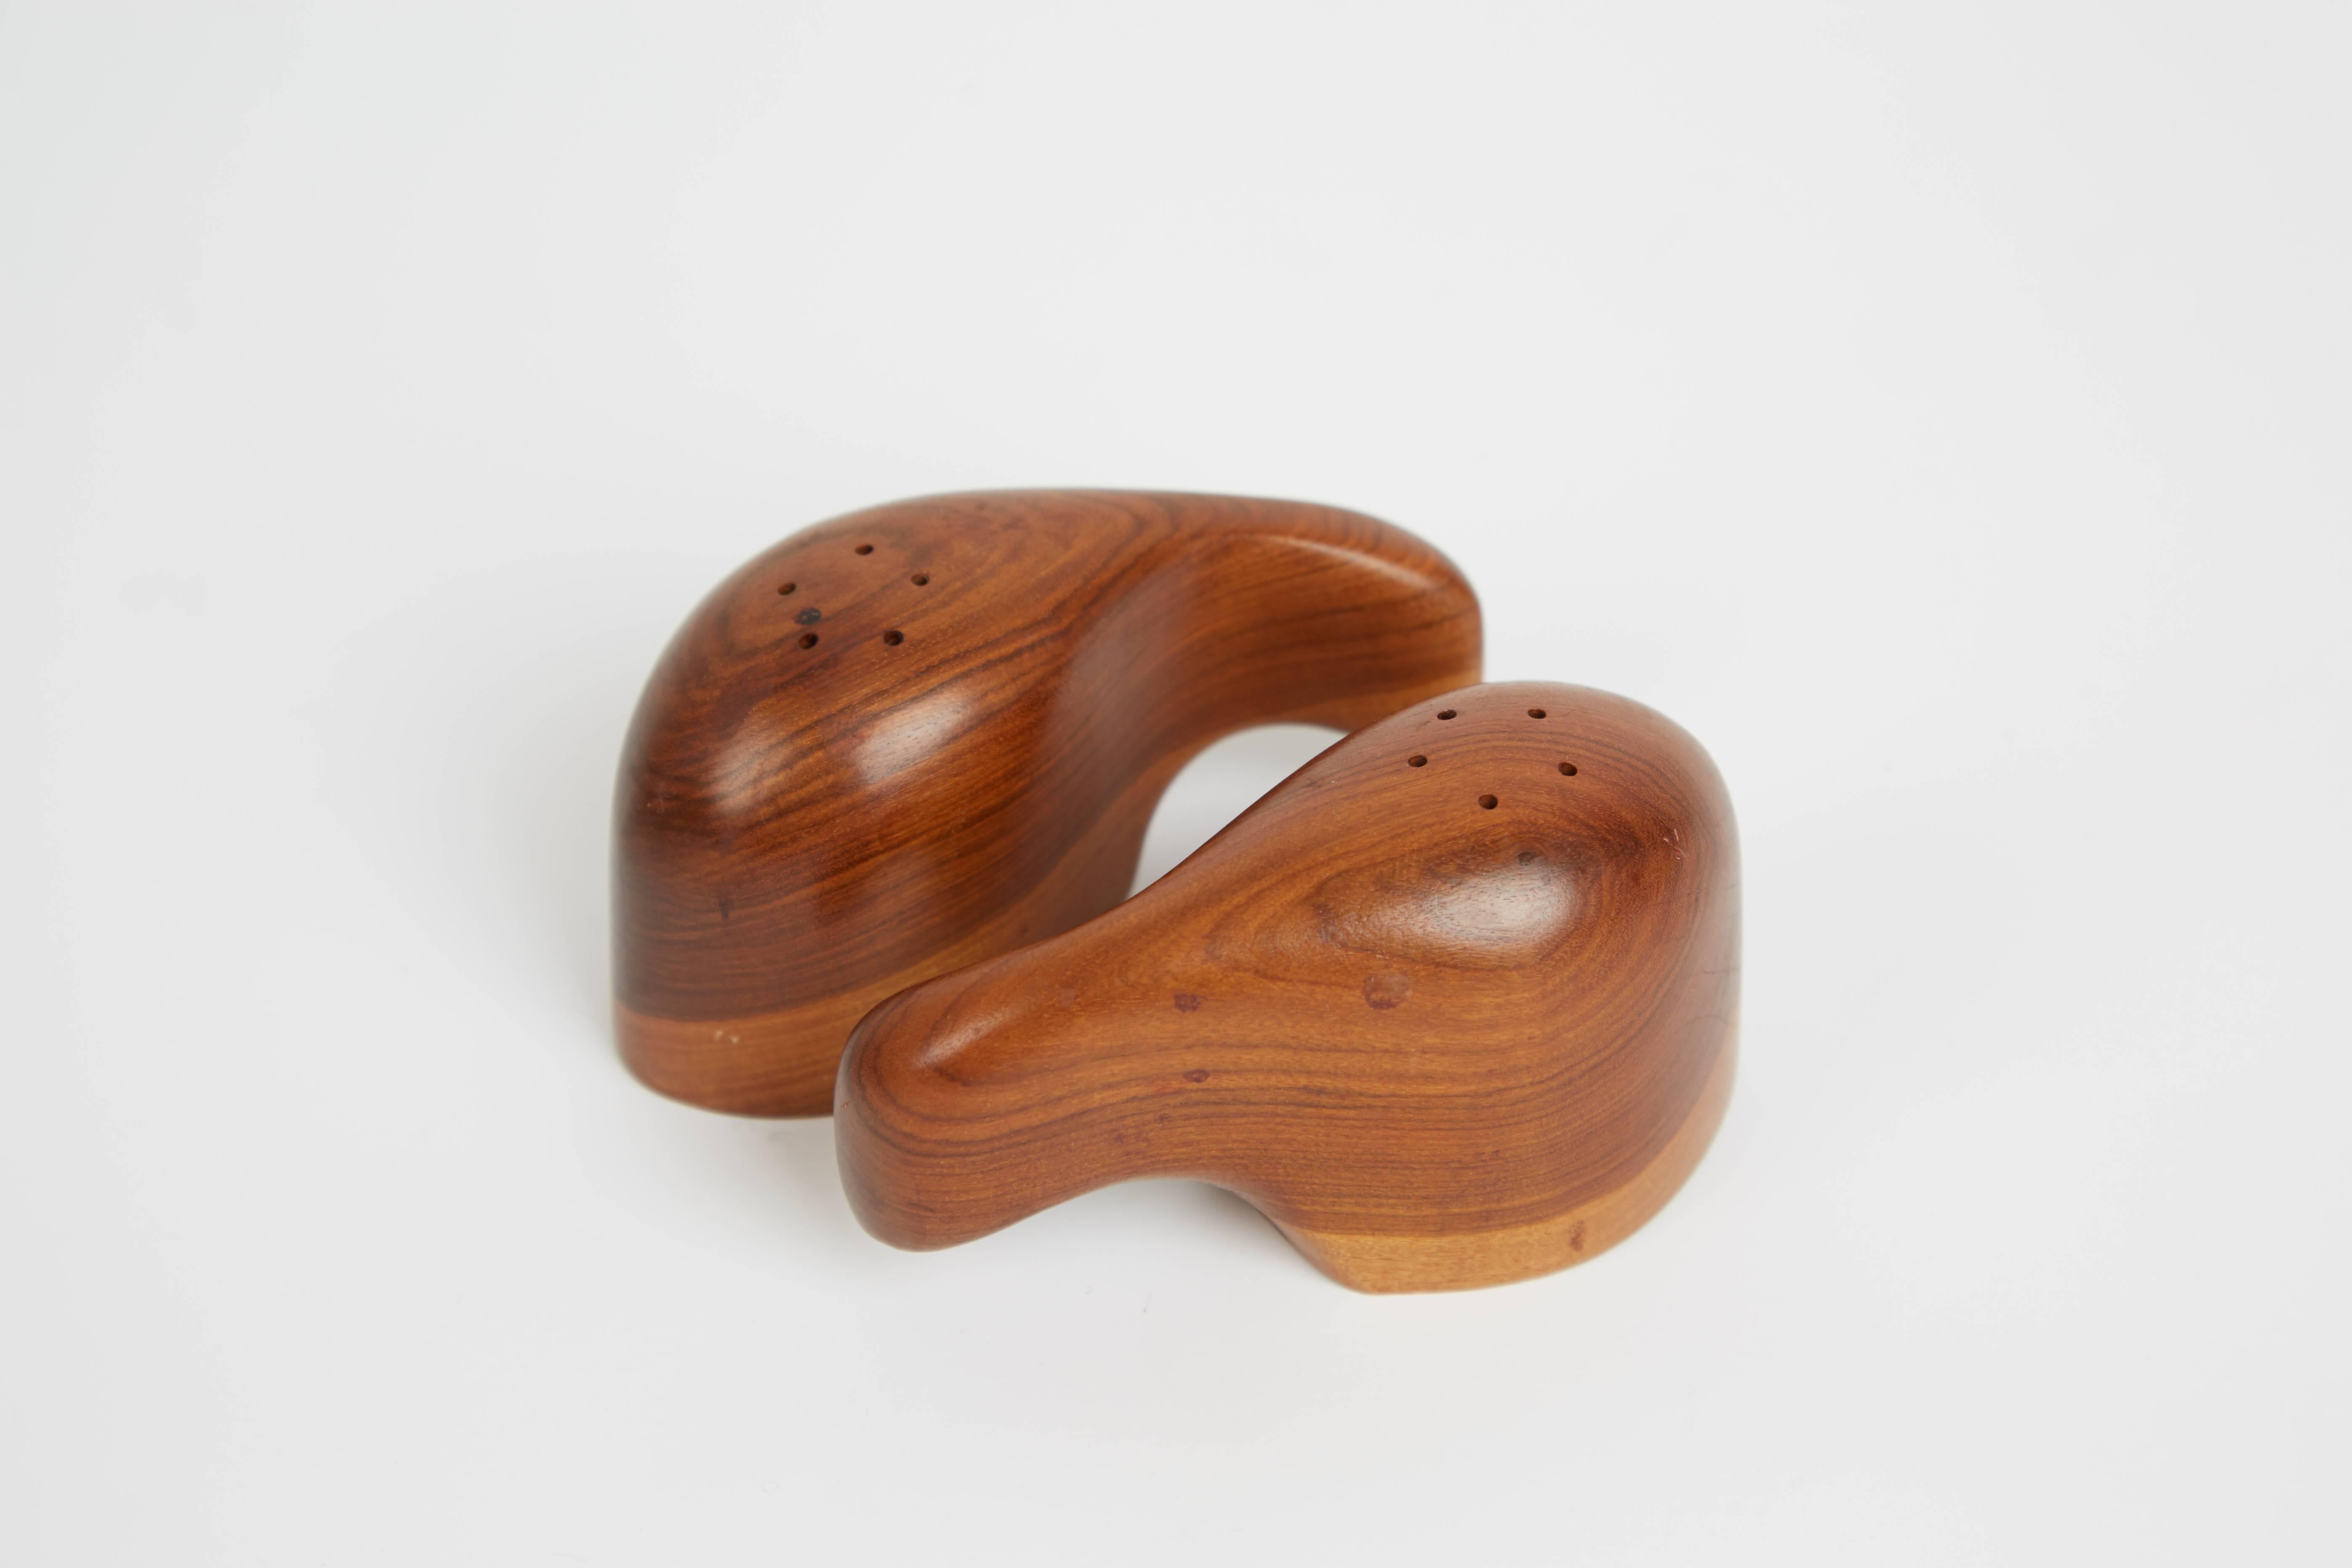 Exquisitely crafted interlocking salt and pepper sets designed by Don Shoemaker for Sen~al of Mexico. Taking advantage of the expertise provided by Mexican artisans, Shoemaker founded Sen~al which produced utilitarian objects, such as these stunning